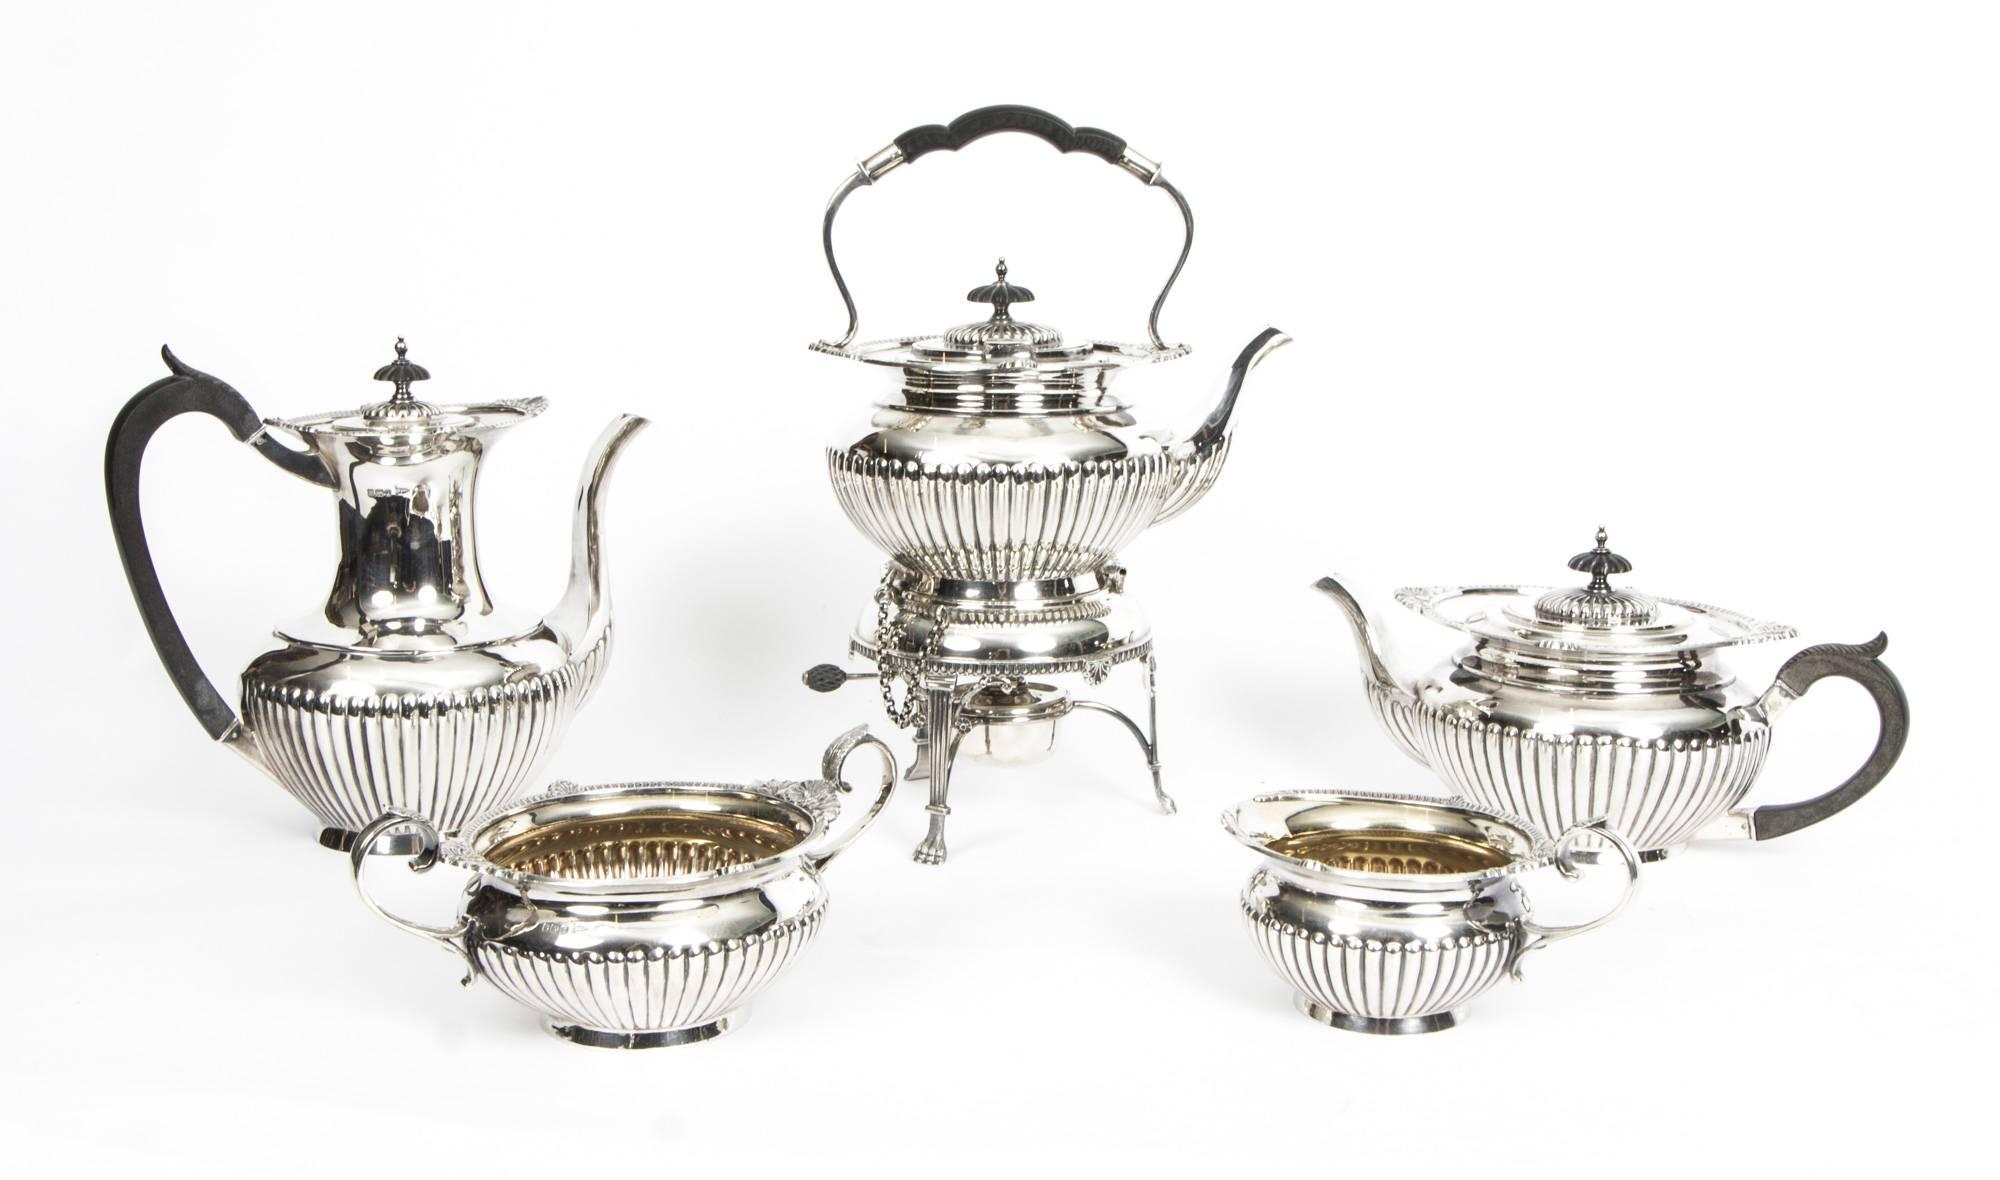 This wonderful set comprises a superb antique English Antique sterling silver five piece tea and coffee set with hallmarks for Sheffield 1908 and the mark of the renowned retailer and silversmith Walker & Wall.

The set comprises a coffee pot, a